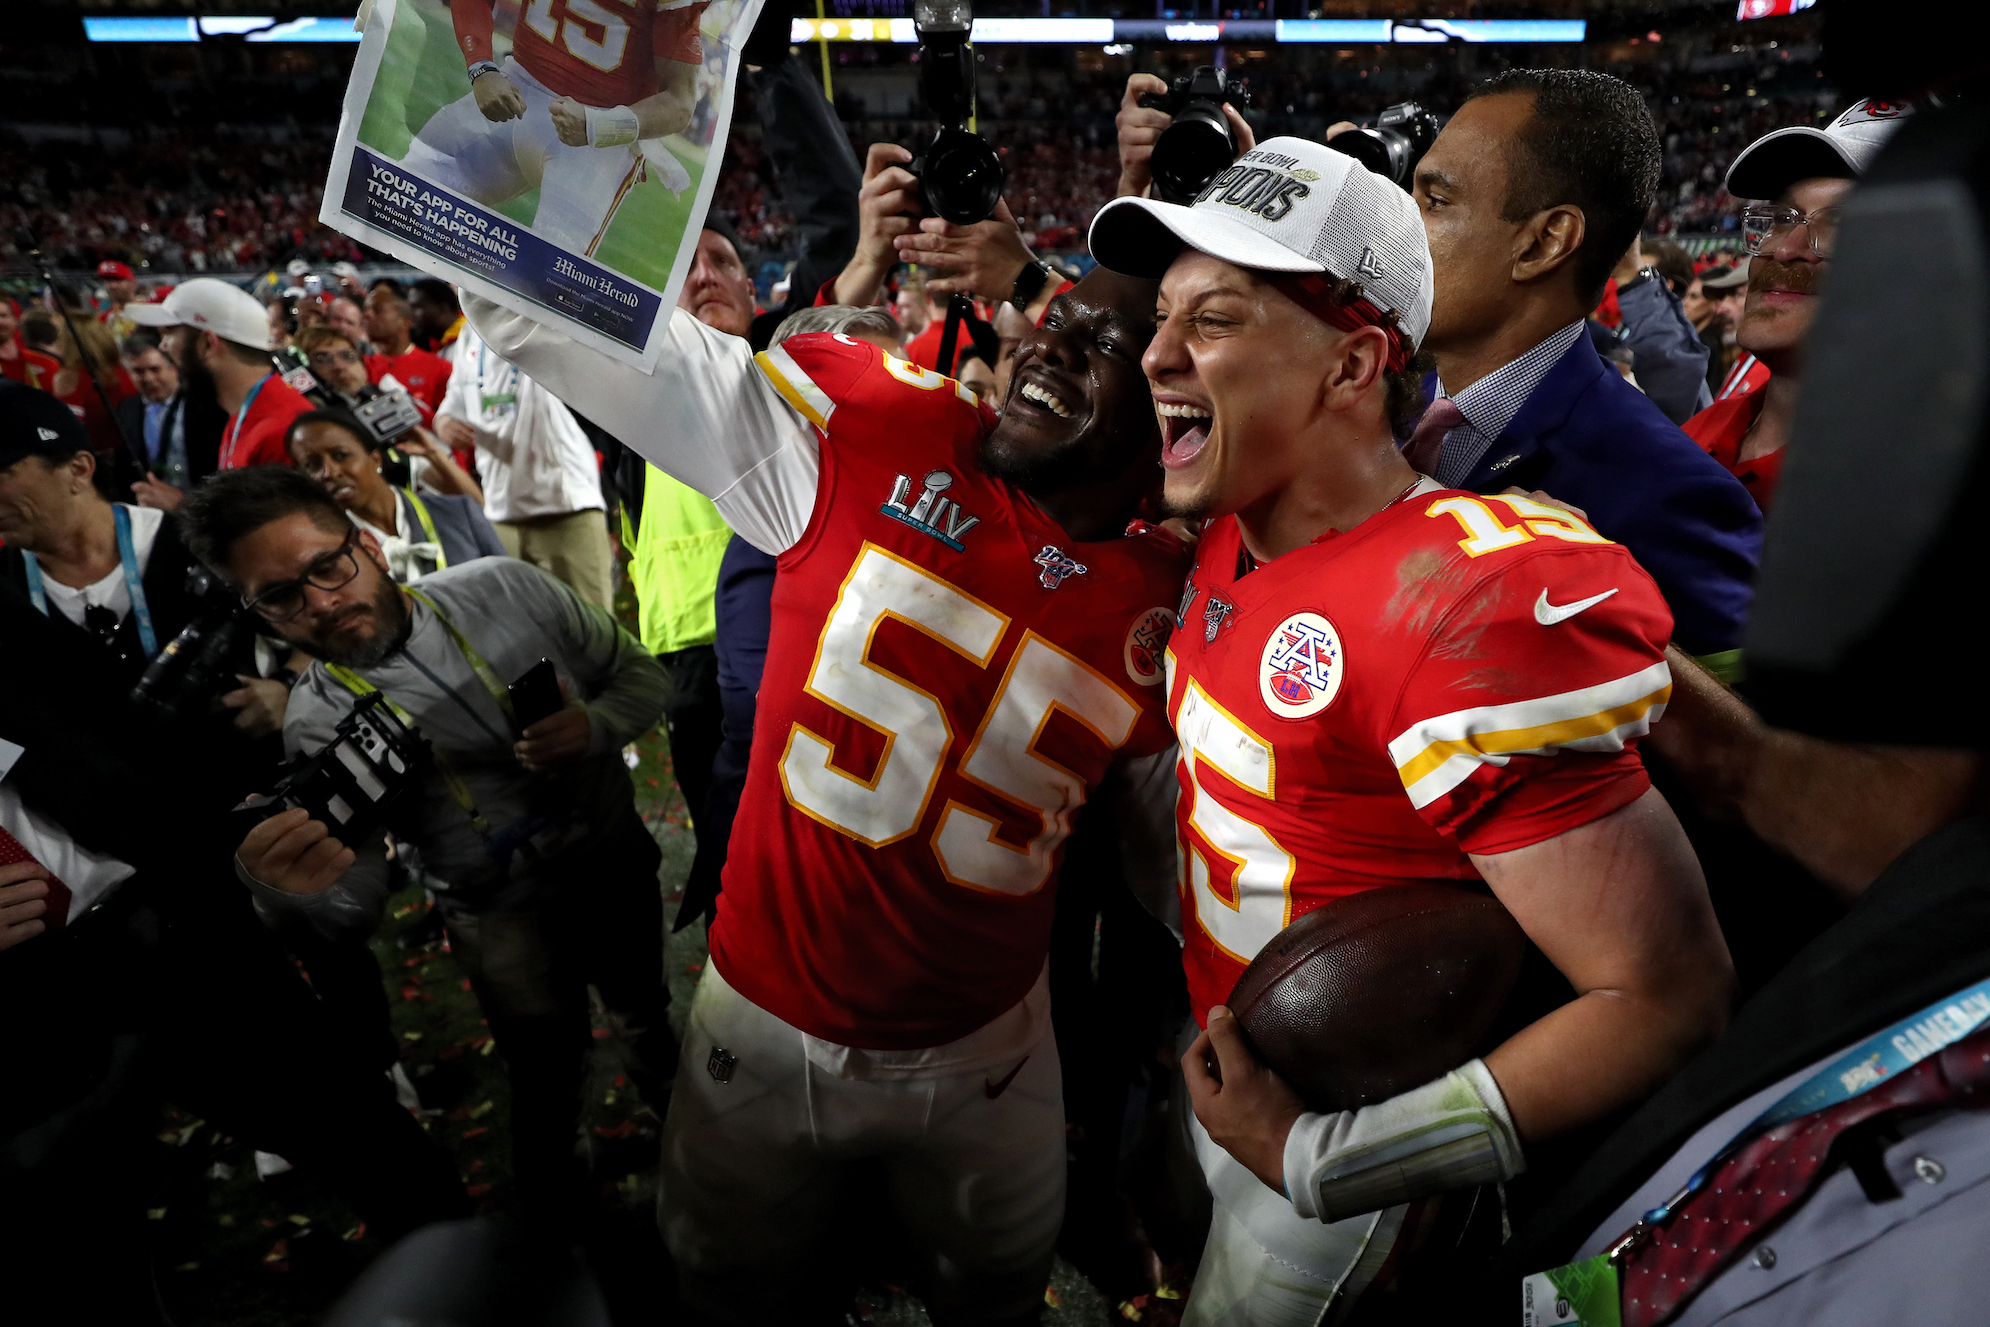 Adam Schefter might've been the first reporter to announce Patrick Mahomes' contract, but he was actually beaten by a liquor store employee.